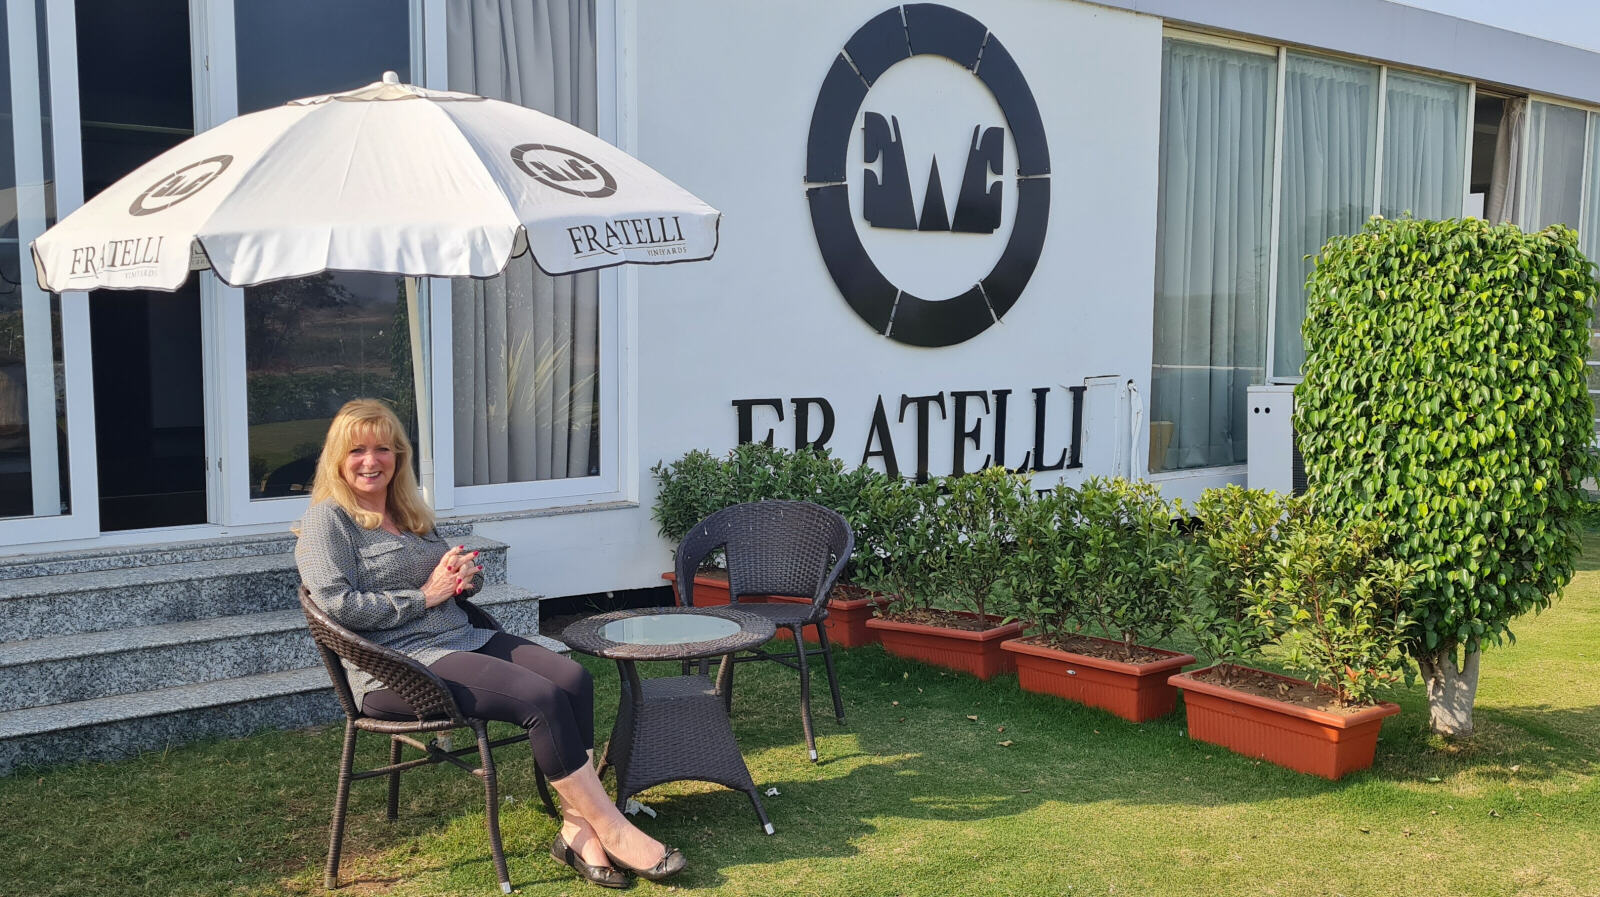 Outside our guest room at the Fratelli vineyard, India